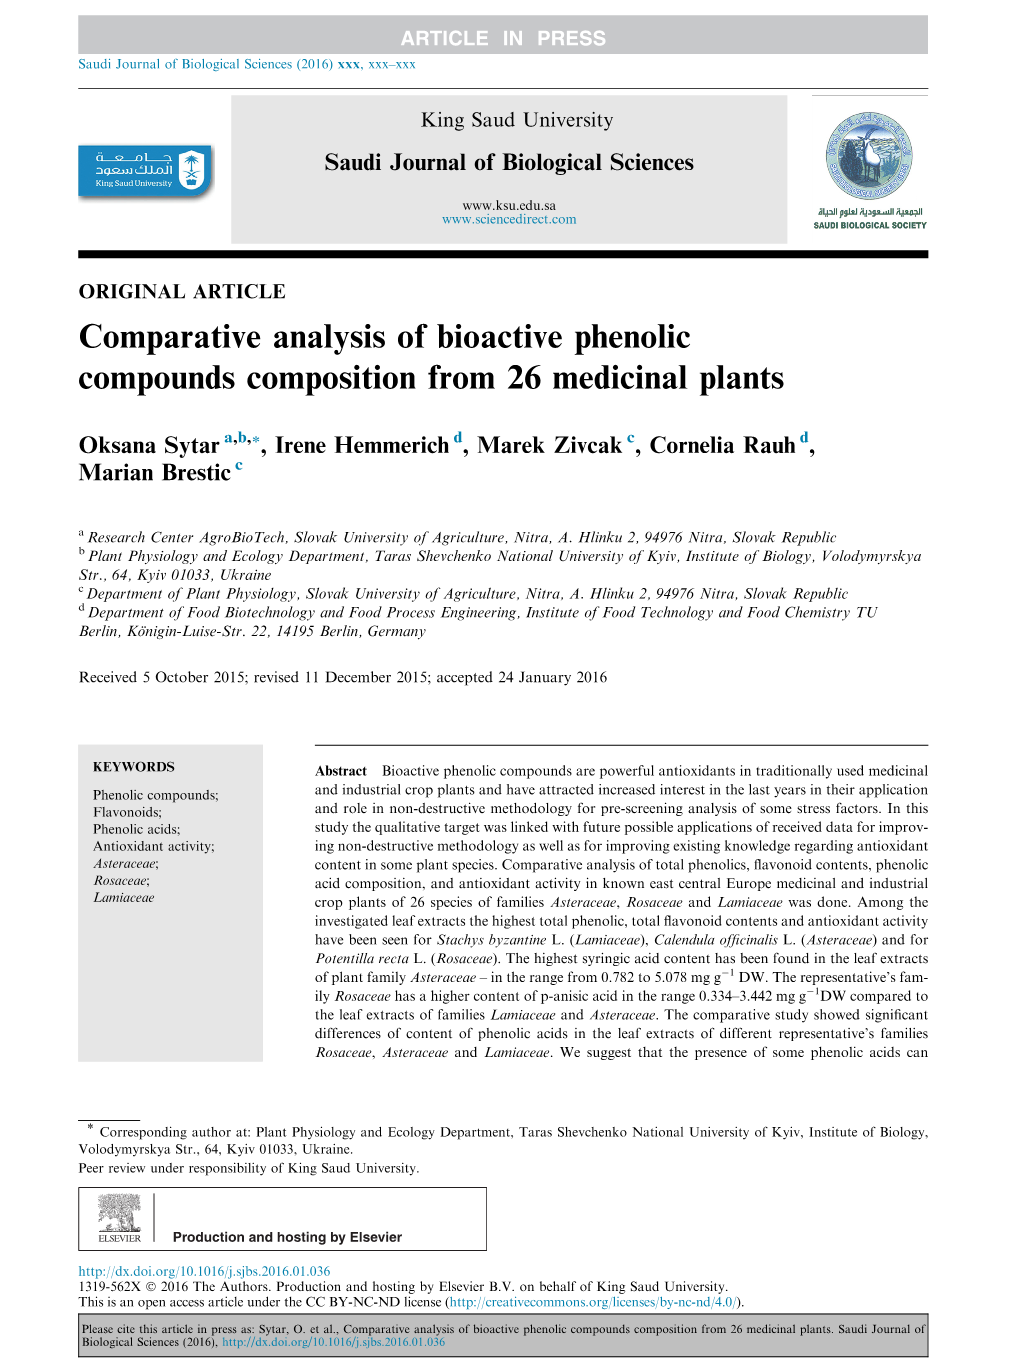 Comparative Analysis of Bioactive Phenolic Compounds Composition from 26 Medicinal Plants